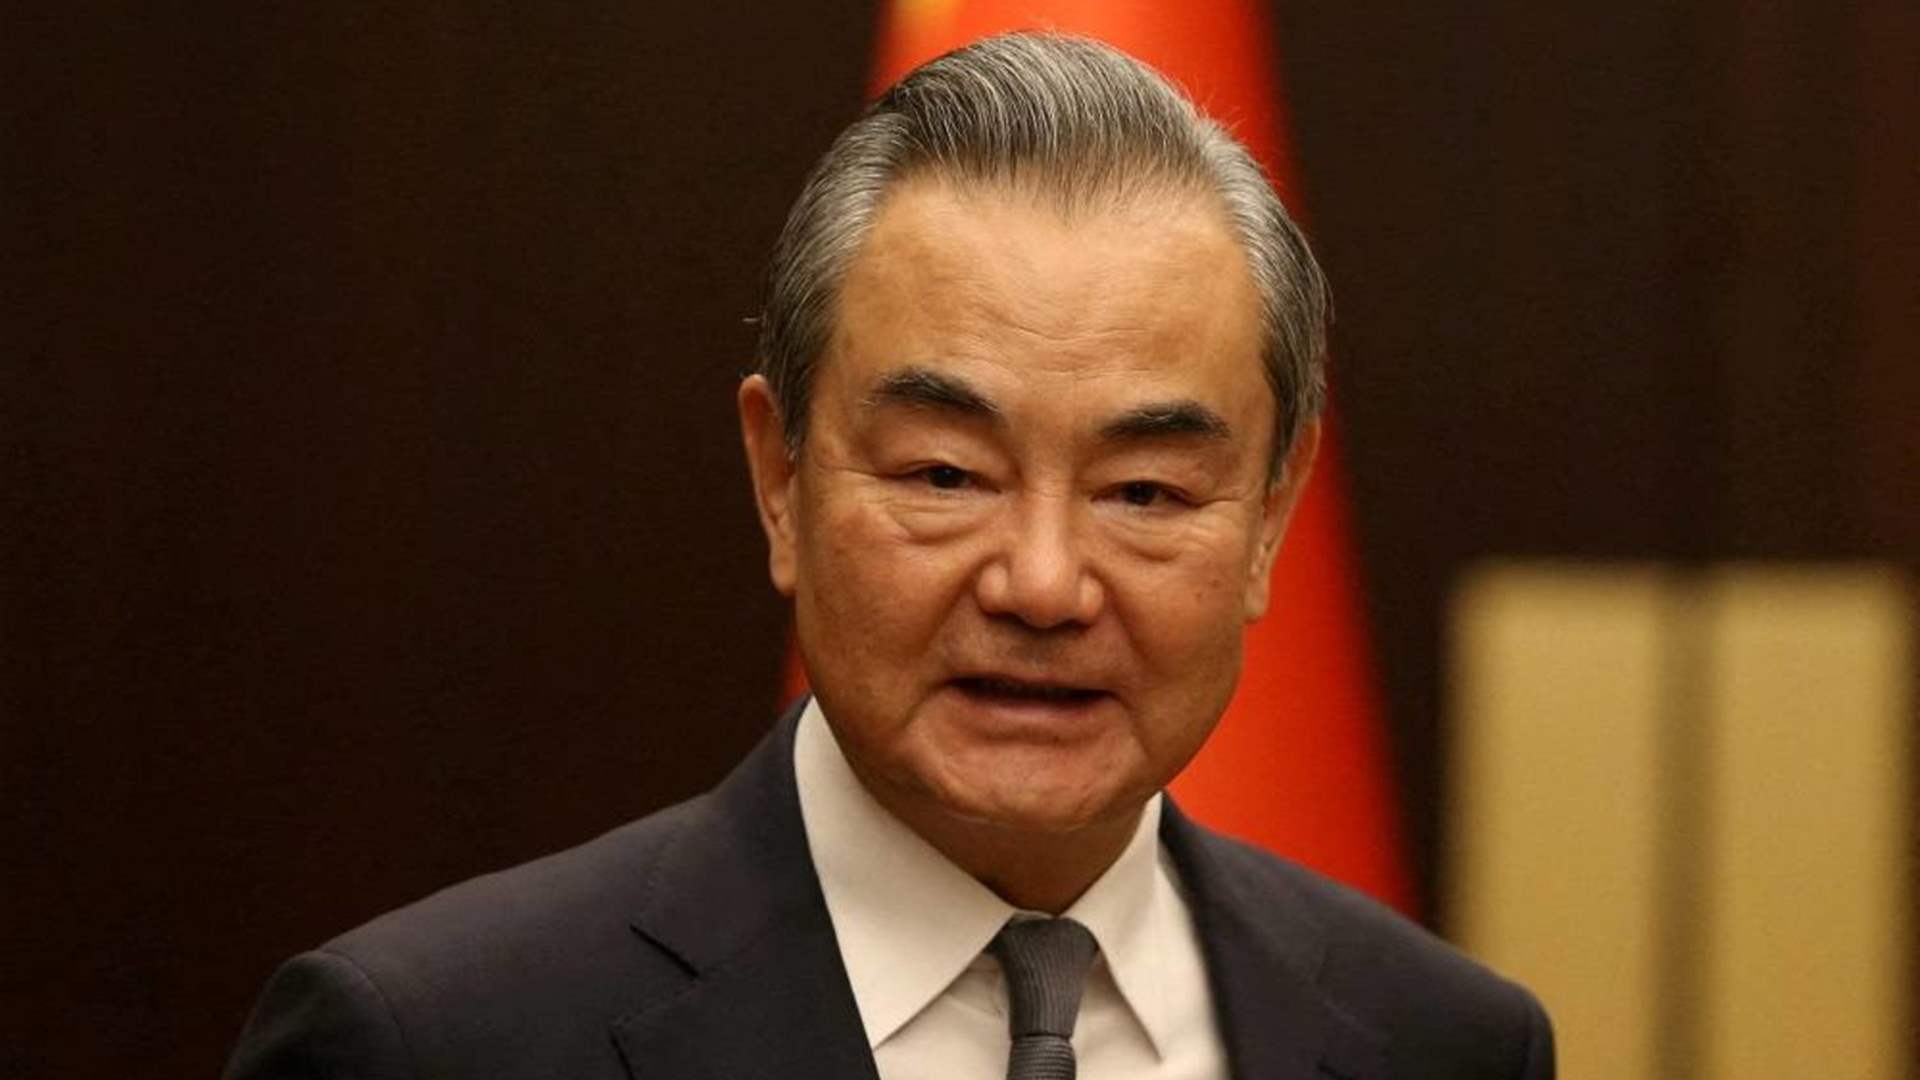 Chinese foreign minister begins tour in southeast Asia amid south China sea tensions